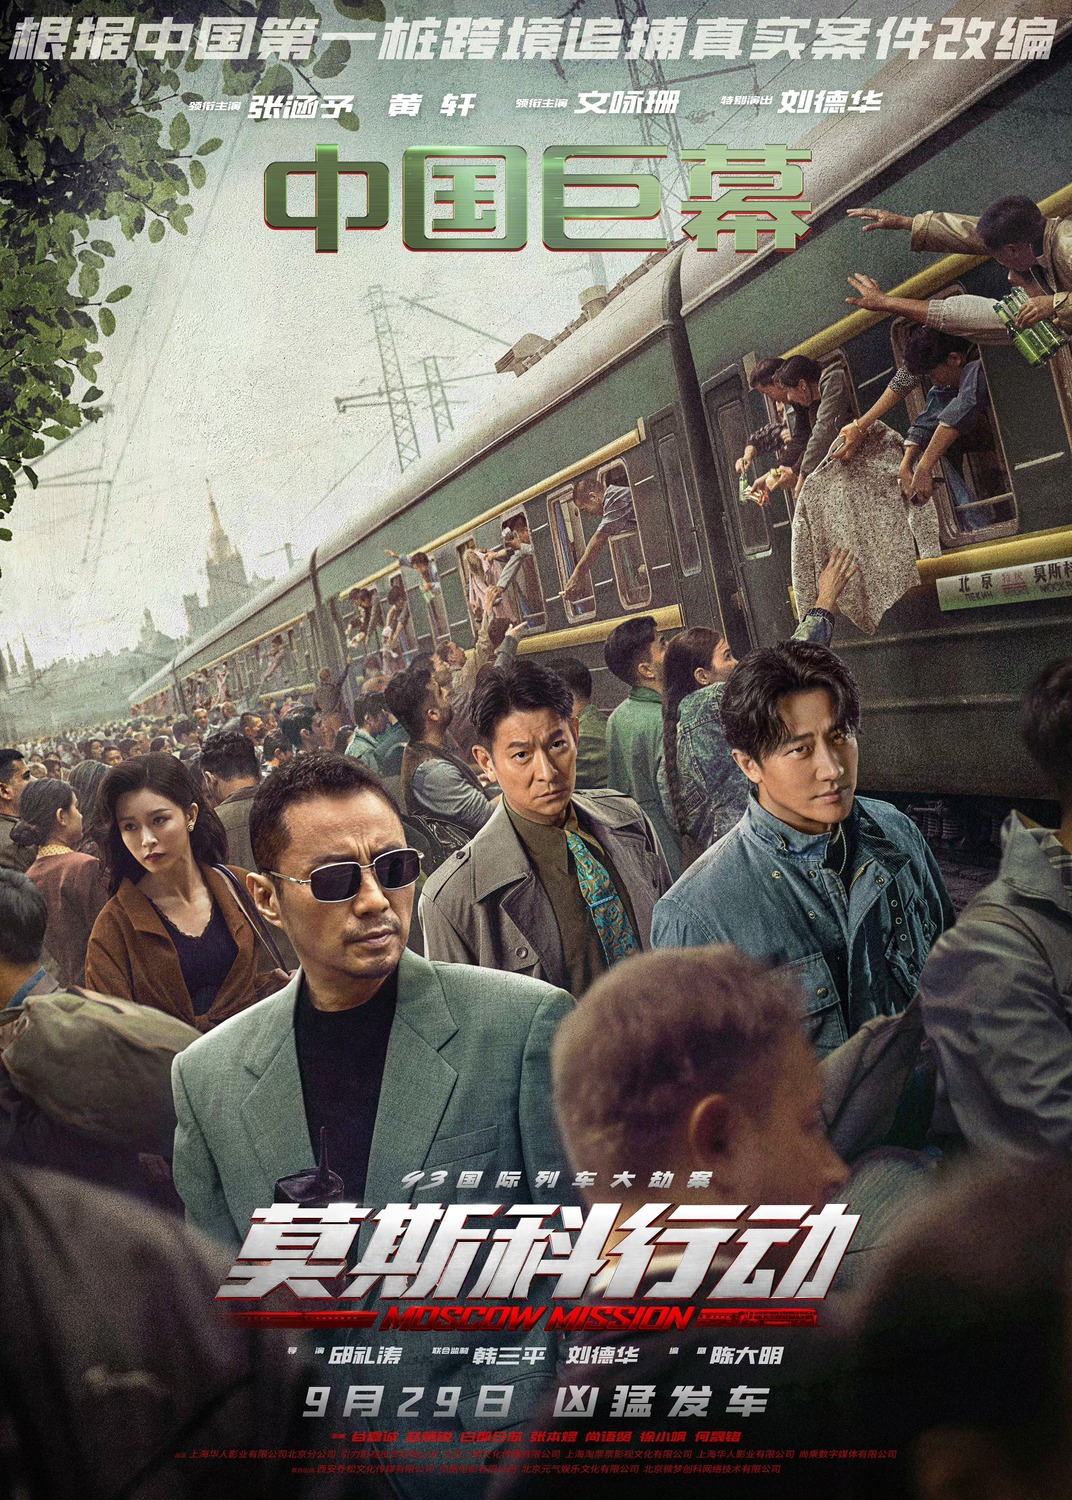 Extra Large Movie Poster Image for Mosike xingdong (#4 of 8)